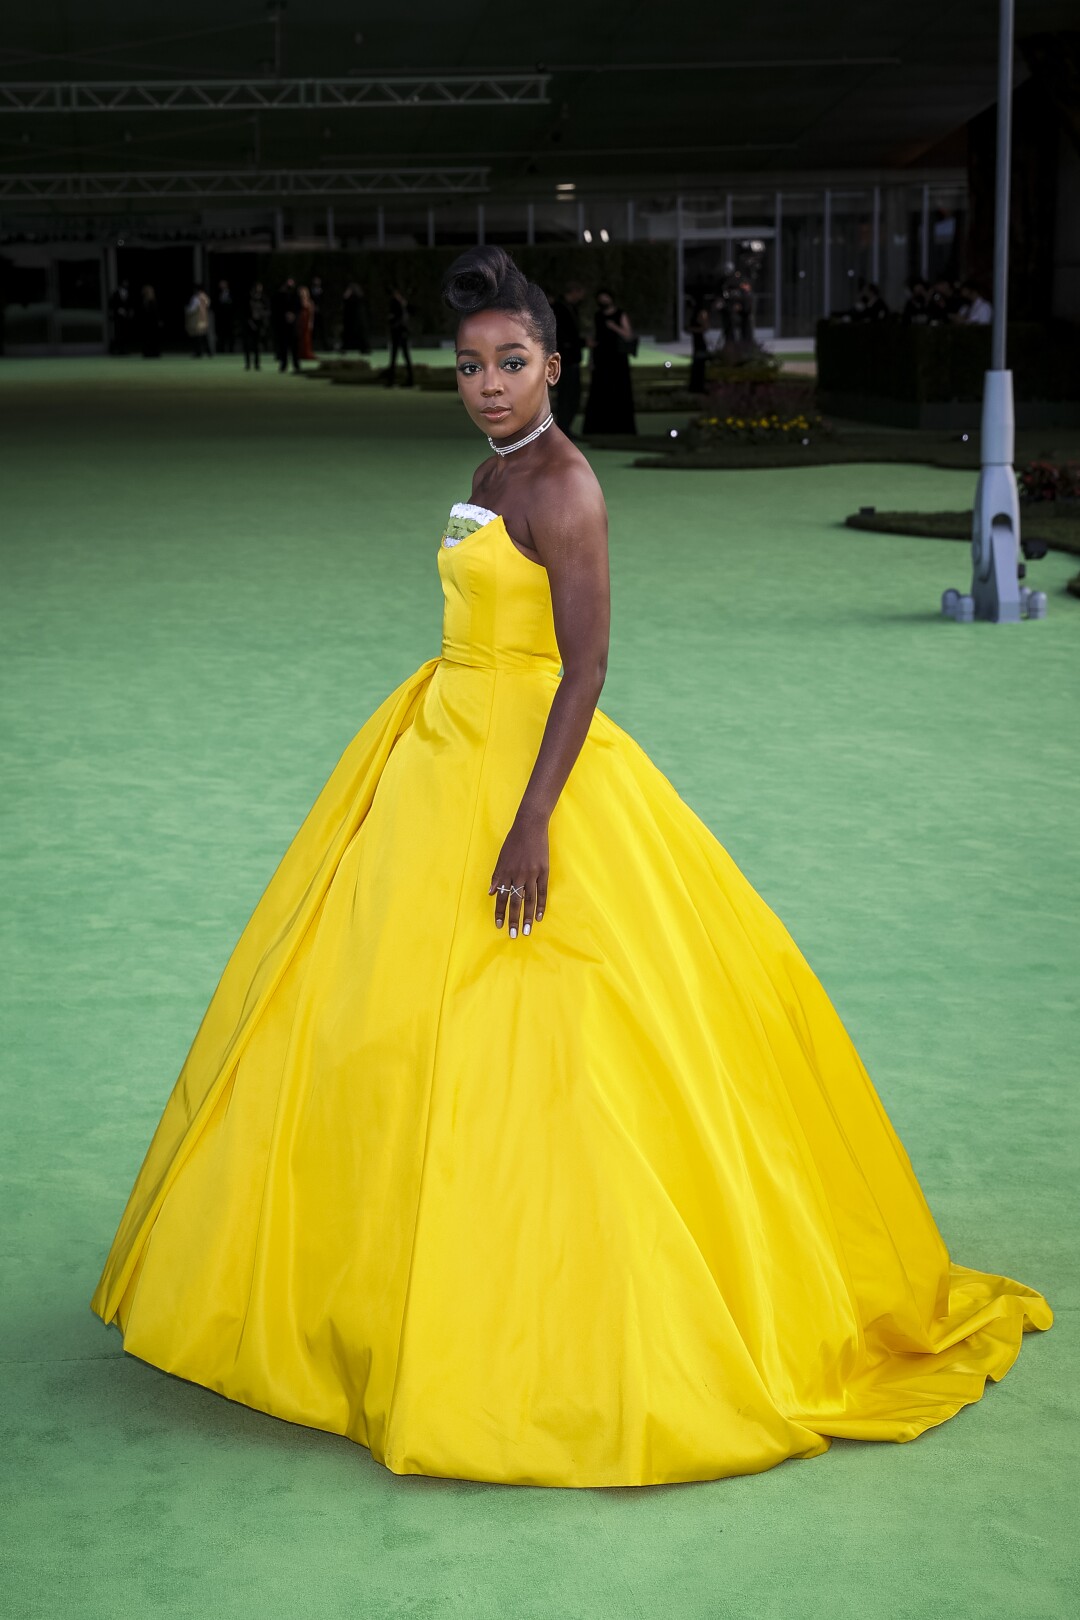 A woman in a yellow dress posing on a green carpet